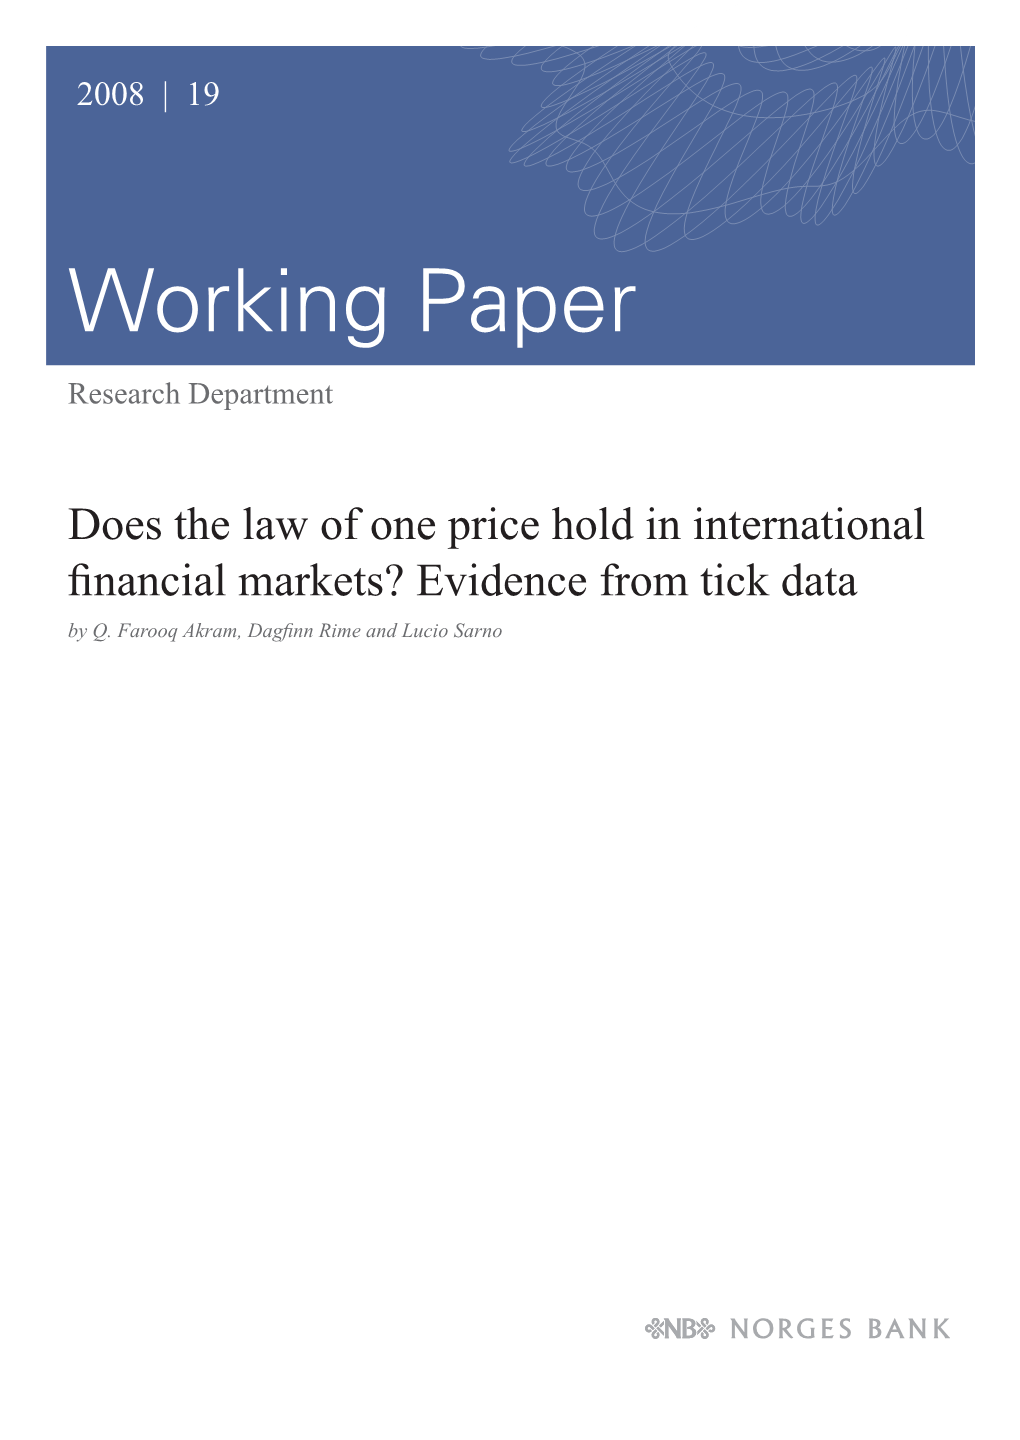 Does the Law of One Price Hold in International Financial Markets? Evidence from Tick Data by Q